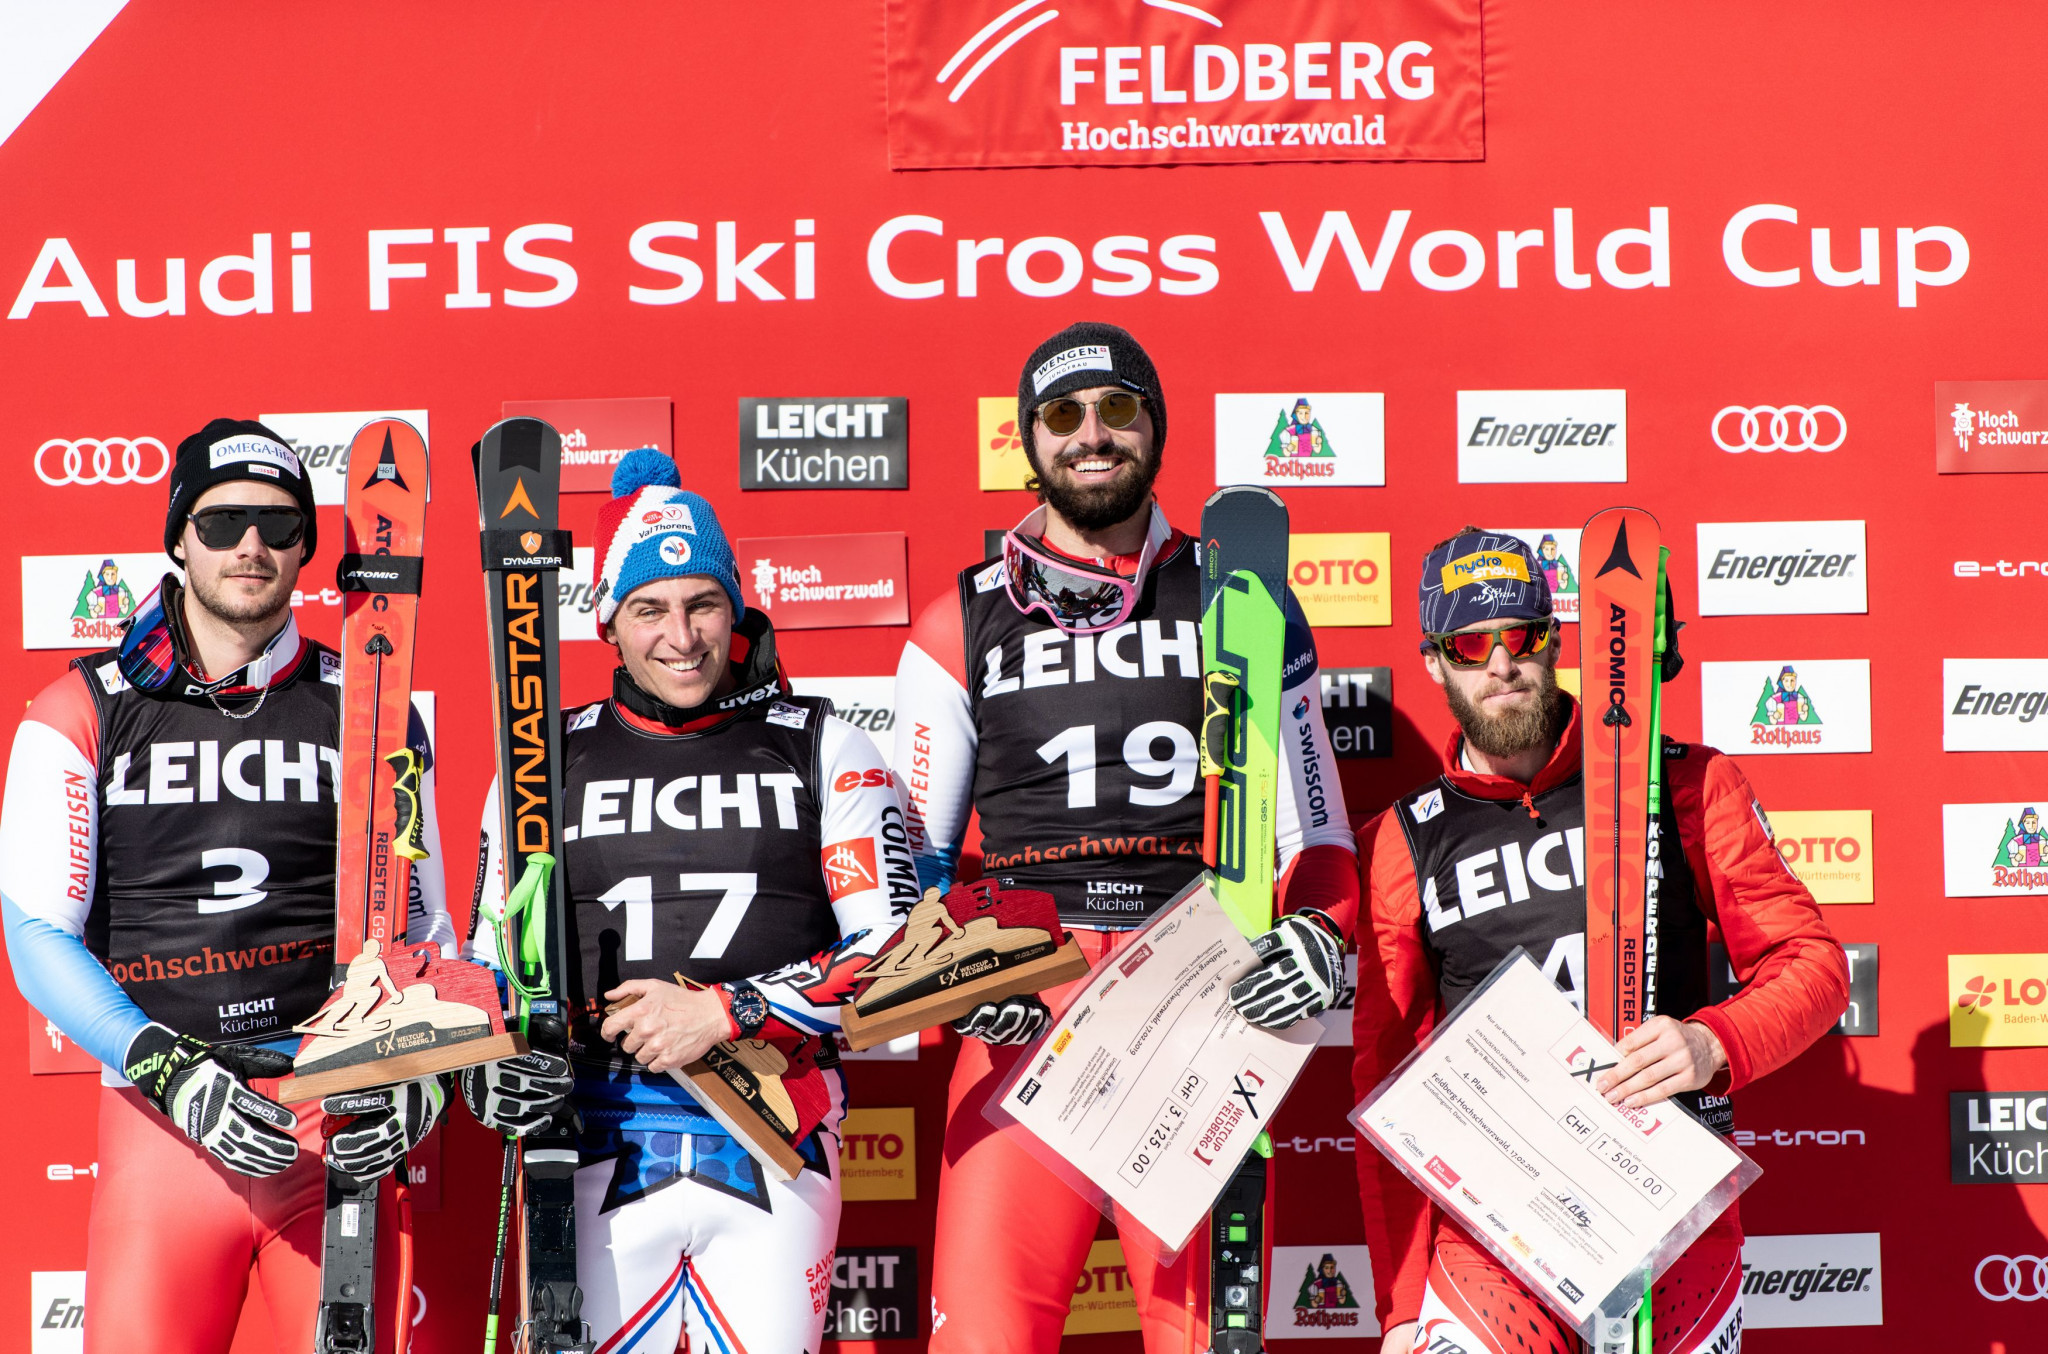 Jean-Frederic Chapuis from France, second from left, won the 2019 FIS Ski Cross World Cup ©Getty Images